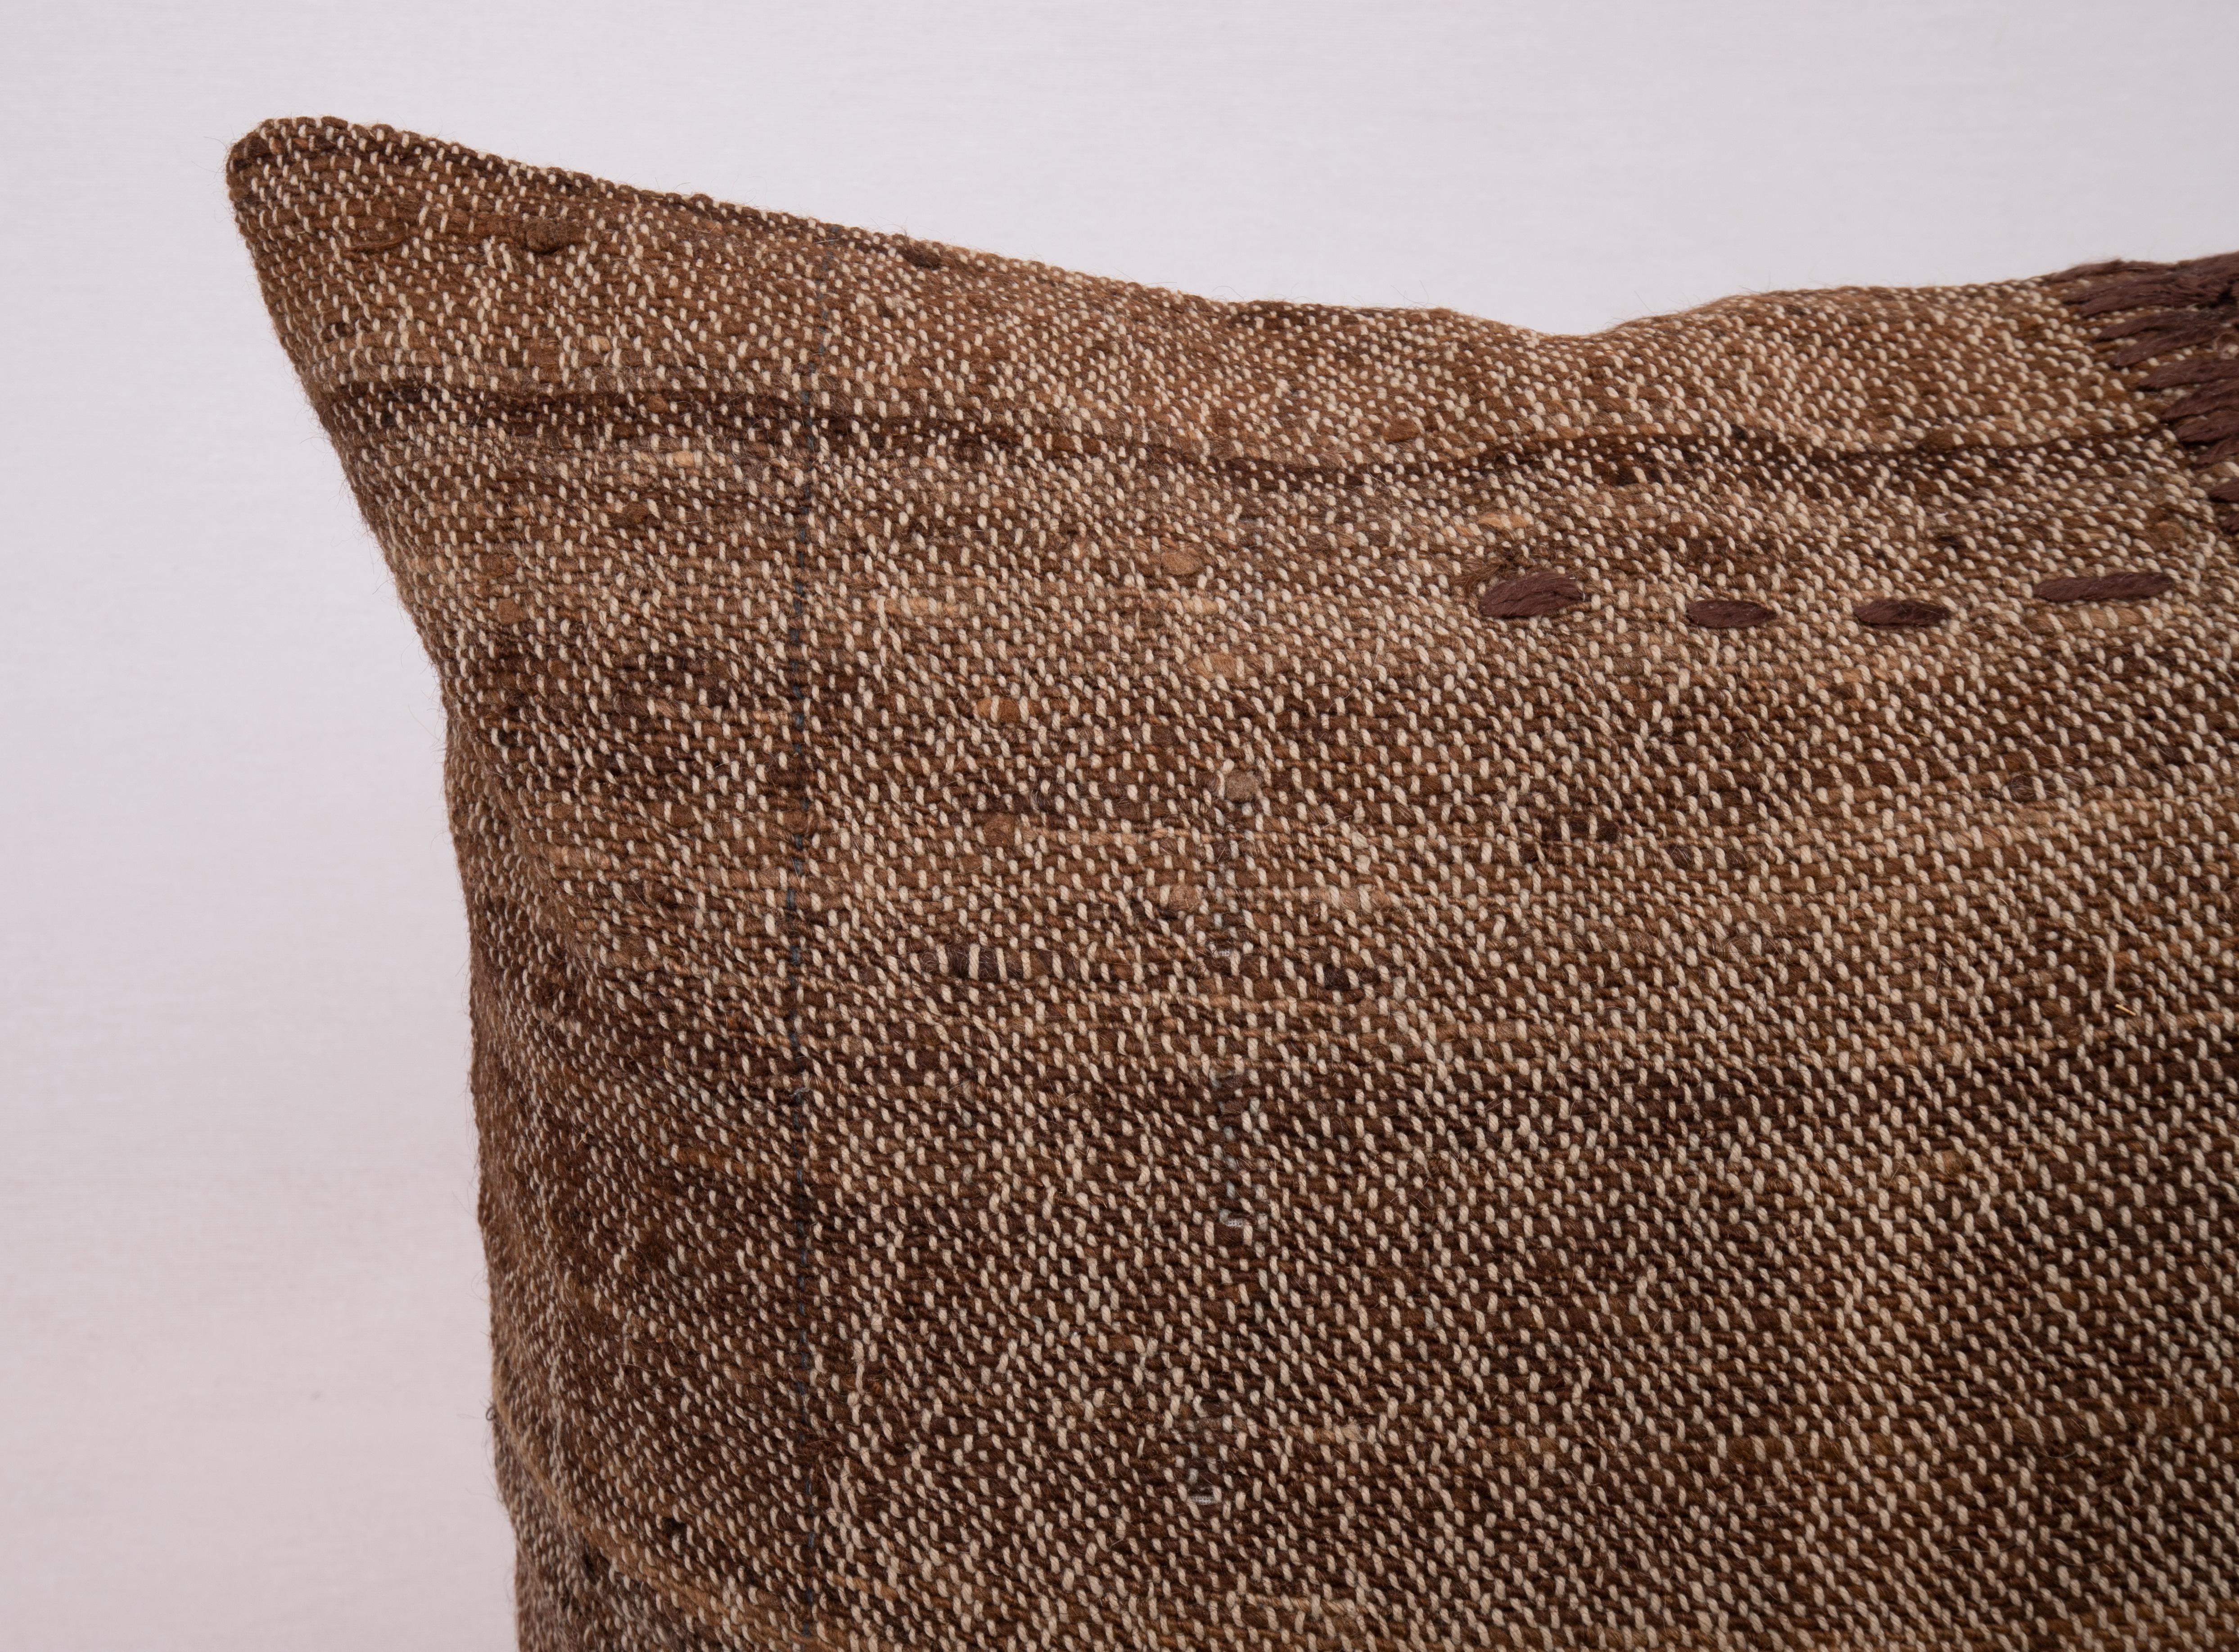 Embroidered Rustic Pillow Case Made from a Vintage Un-Dyed Wool Coverlet, Mid 20th C